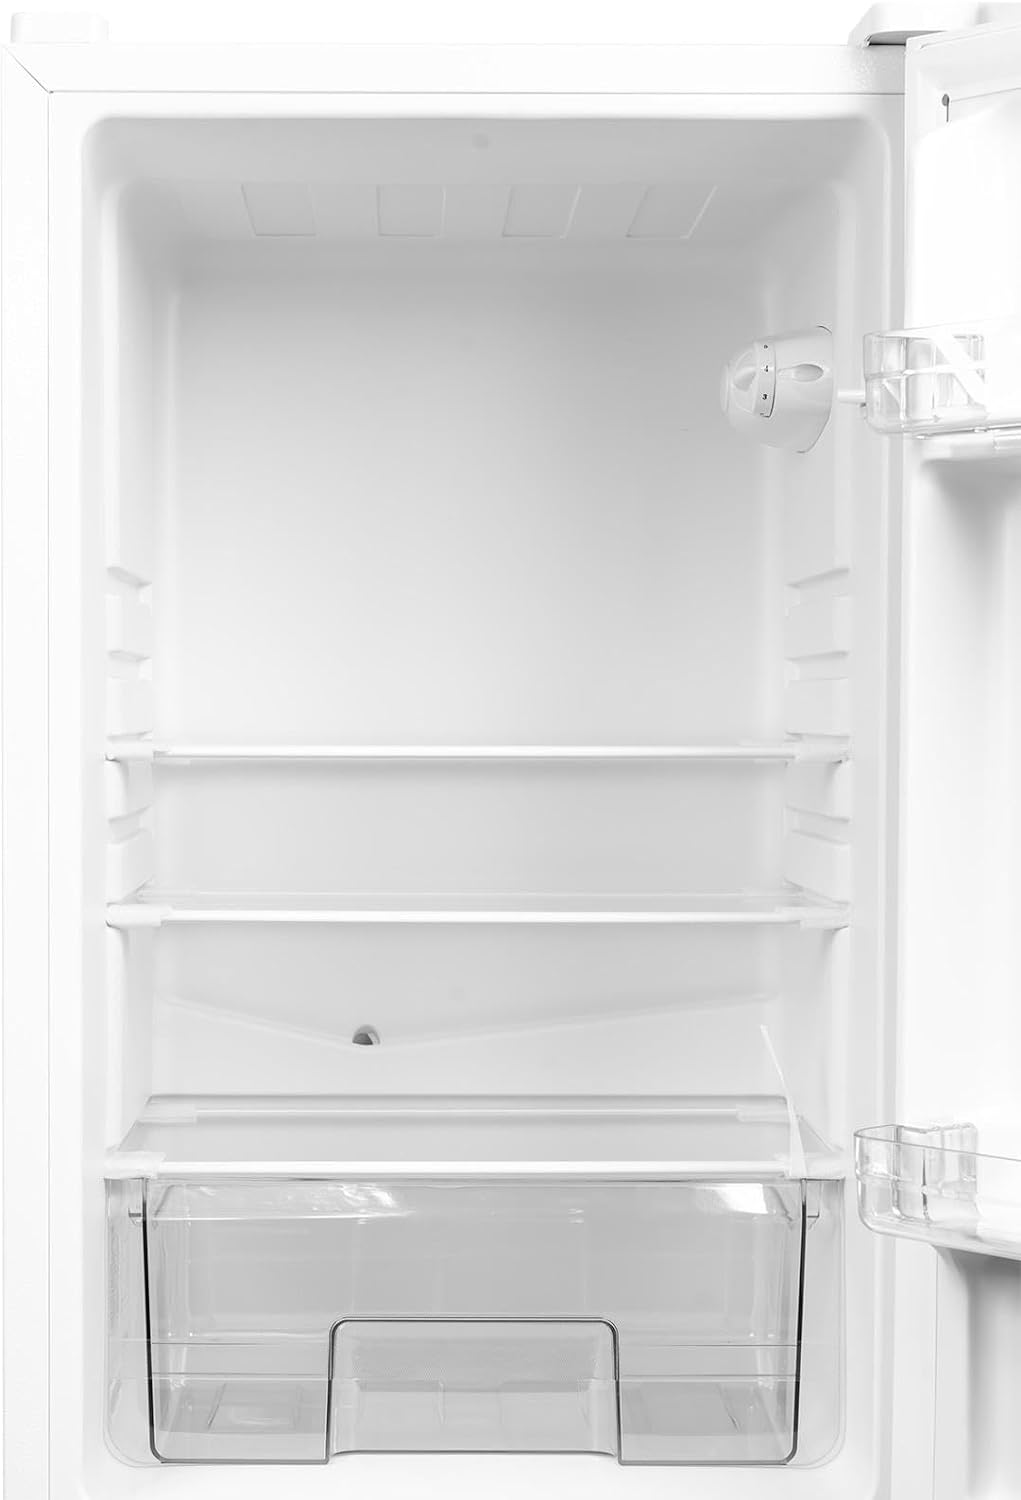 SIA SFF1490W 60/40 Split Freestanding 153L Combi Fridge Freezer with 4* Freezer Compartment in White, Includes 2 Years Parts & Labour Warranty - Amazing Gadgets Outlet